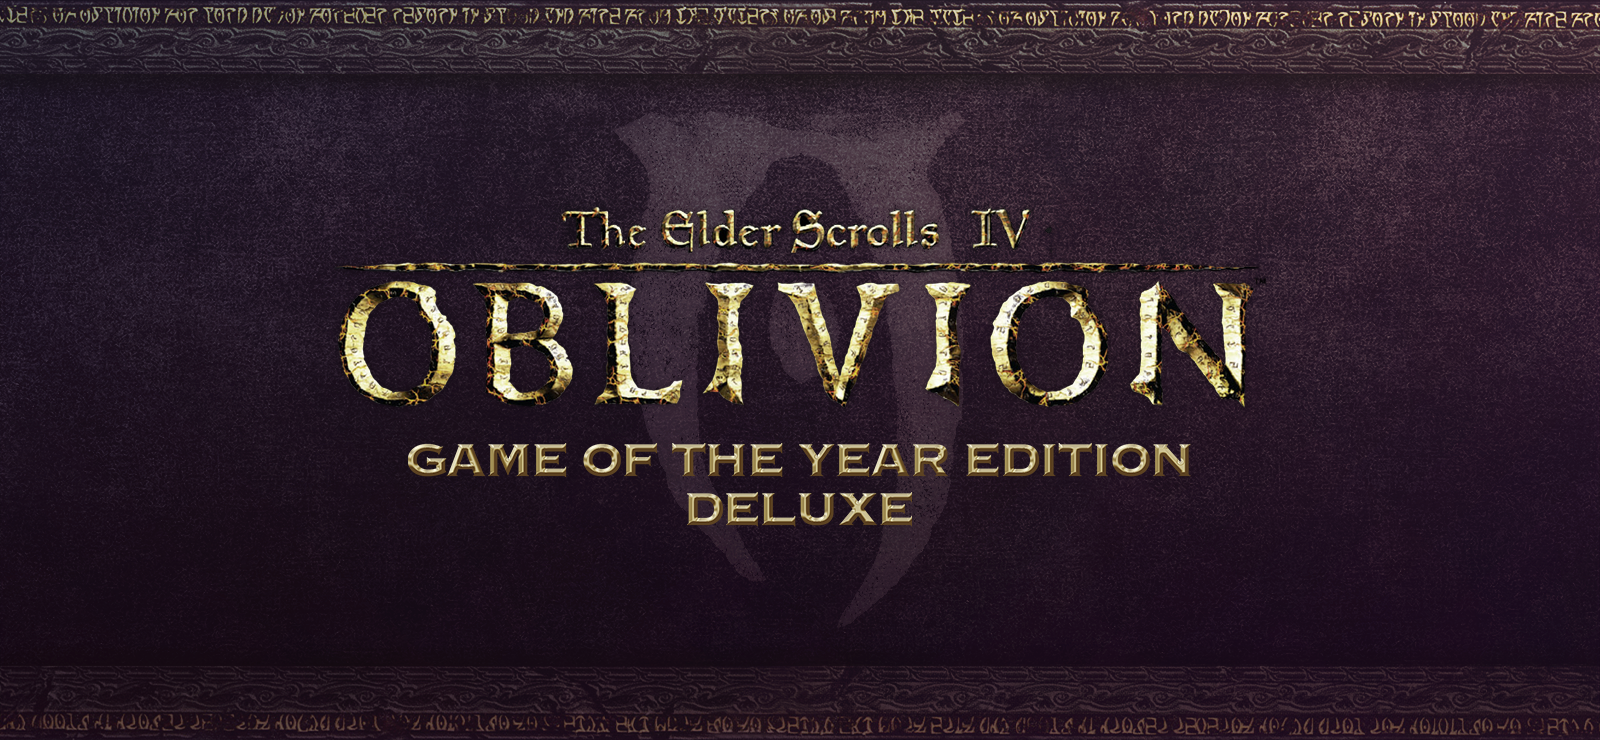 BESTSELLER - The Elder Scrolls IV: Oblivion - Game Of The Year Edition Deluxe